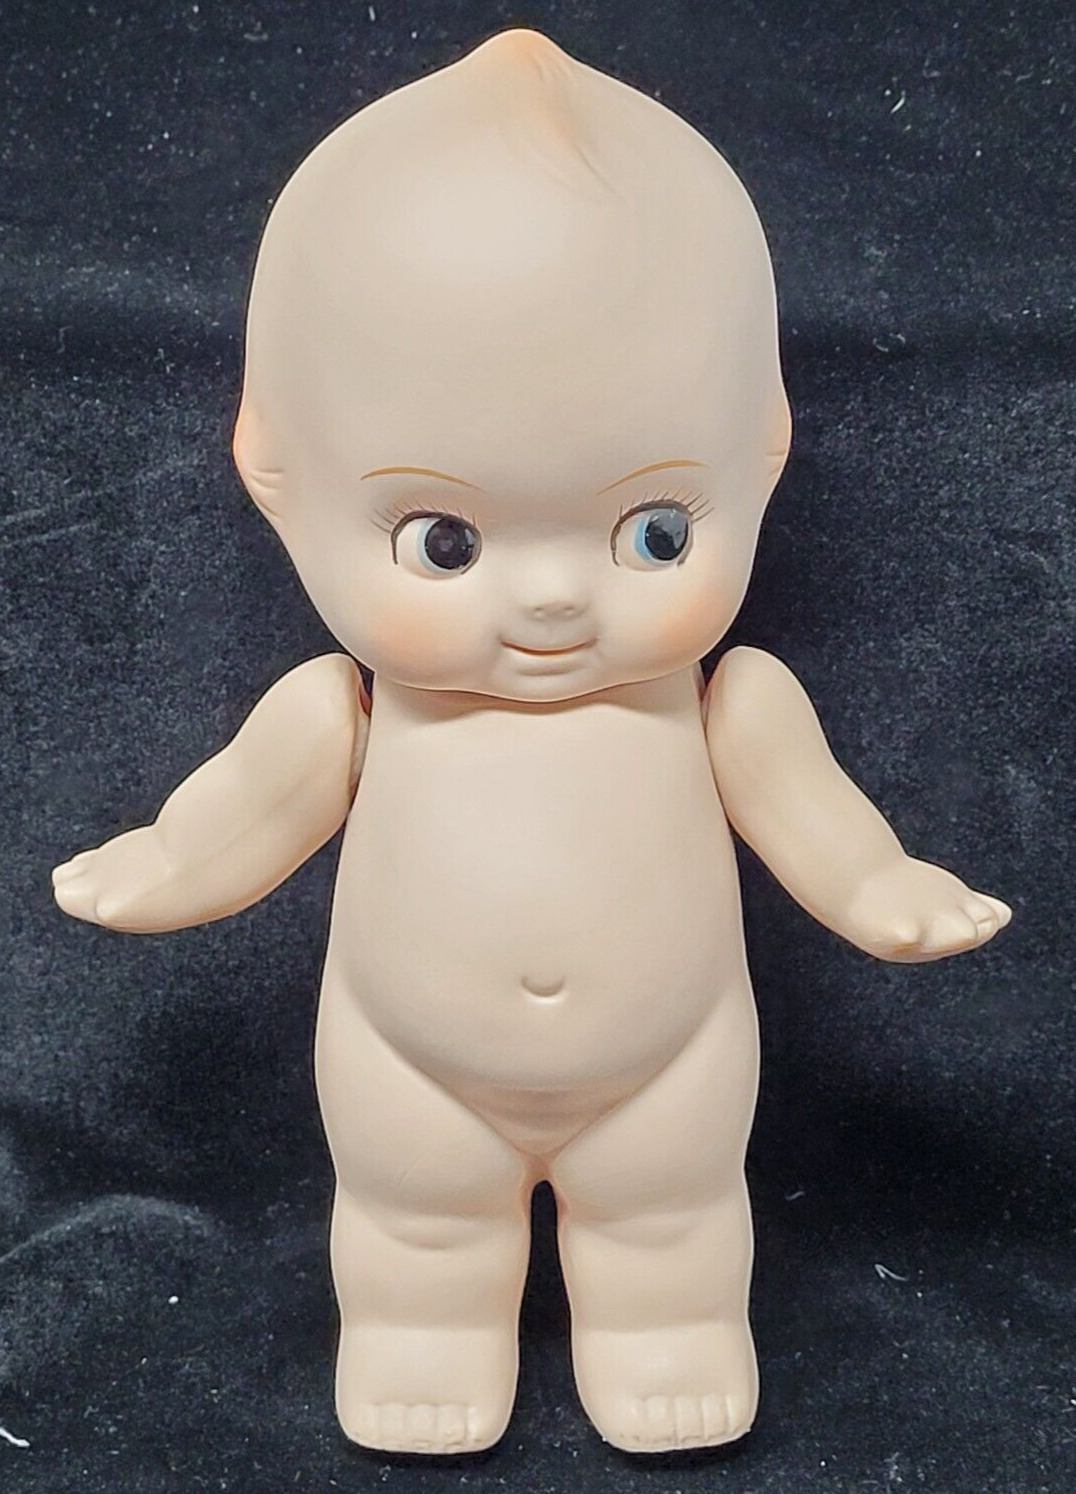 Vintage Porcelain Kewpie Doll Moveable head and arms Collectible NEW